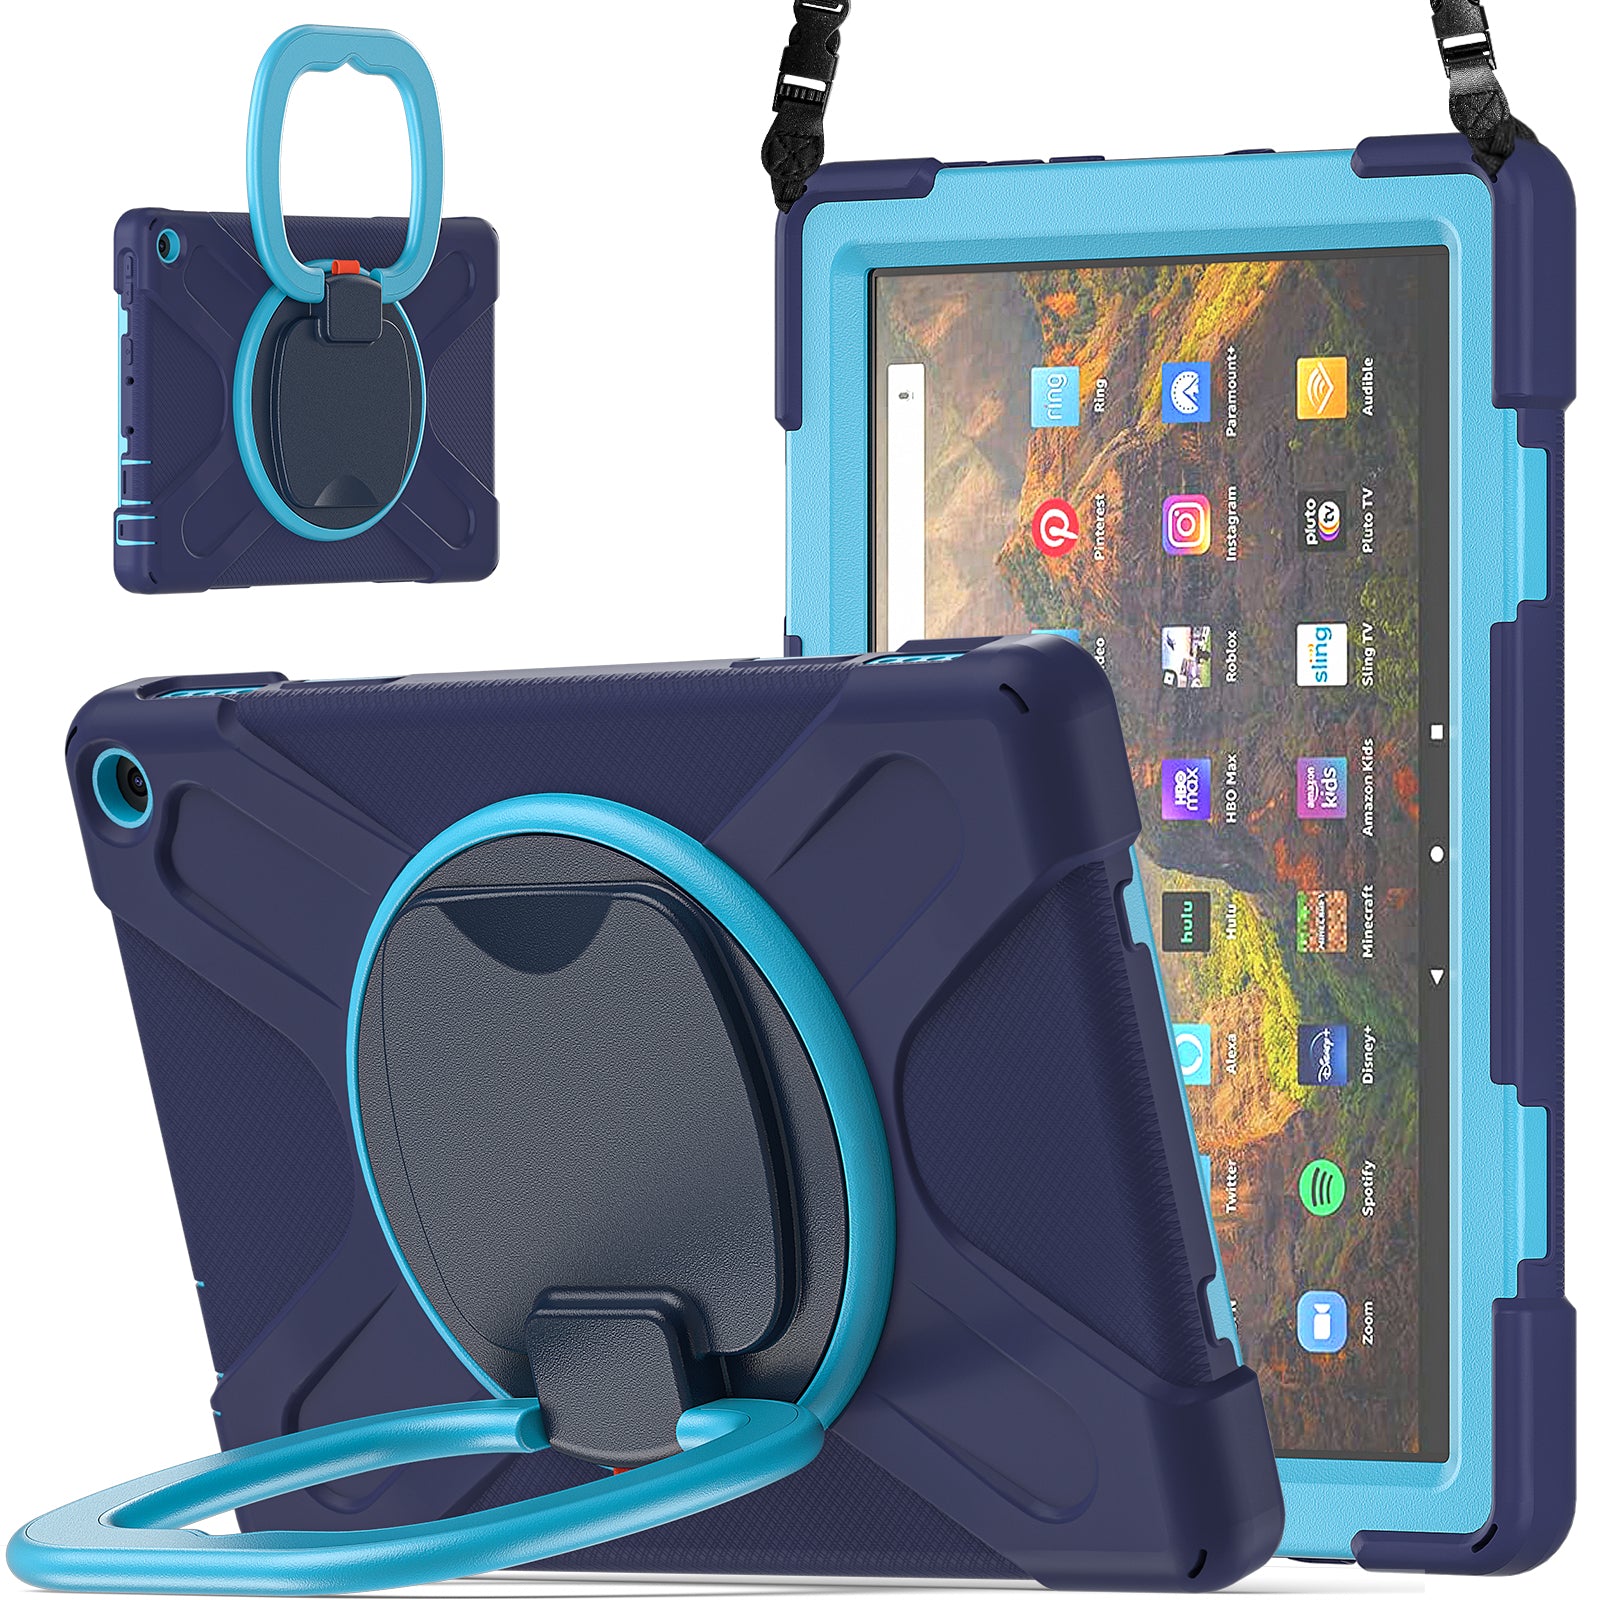 Pirate Box Amazon Kindle Fire HD 10 Plus (2021) Case Hook Stand Rotating with Hand Holder Shoulder Strap